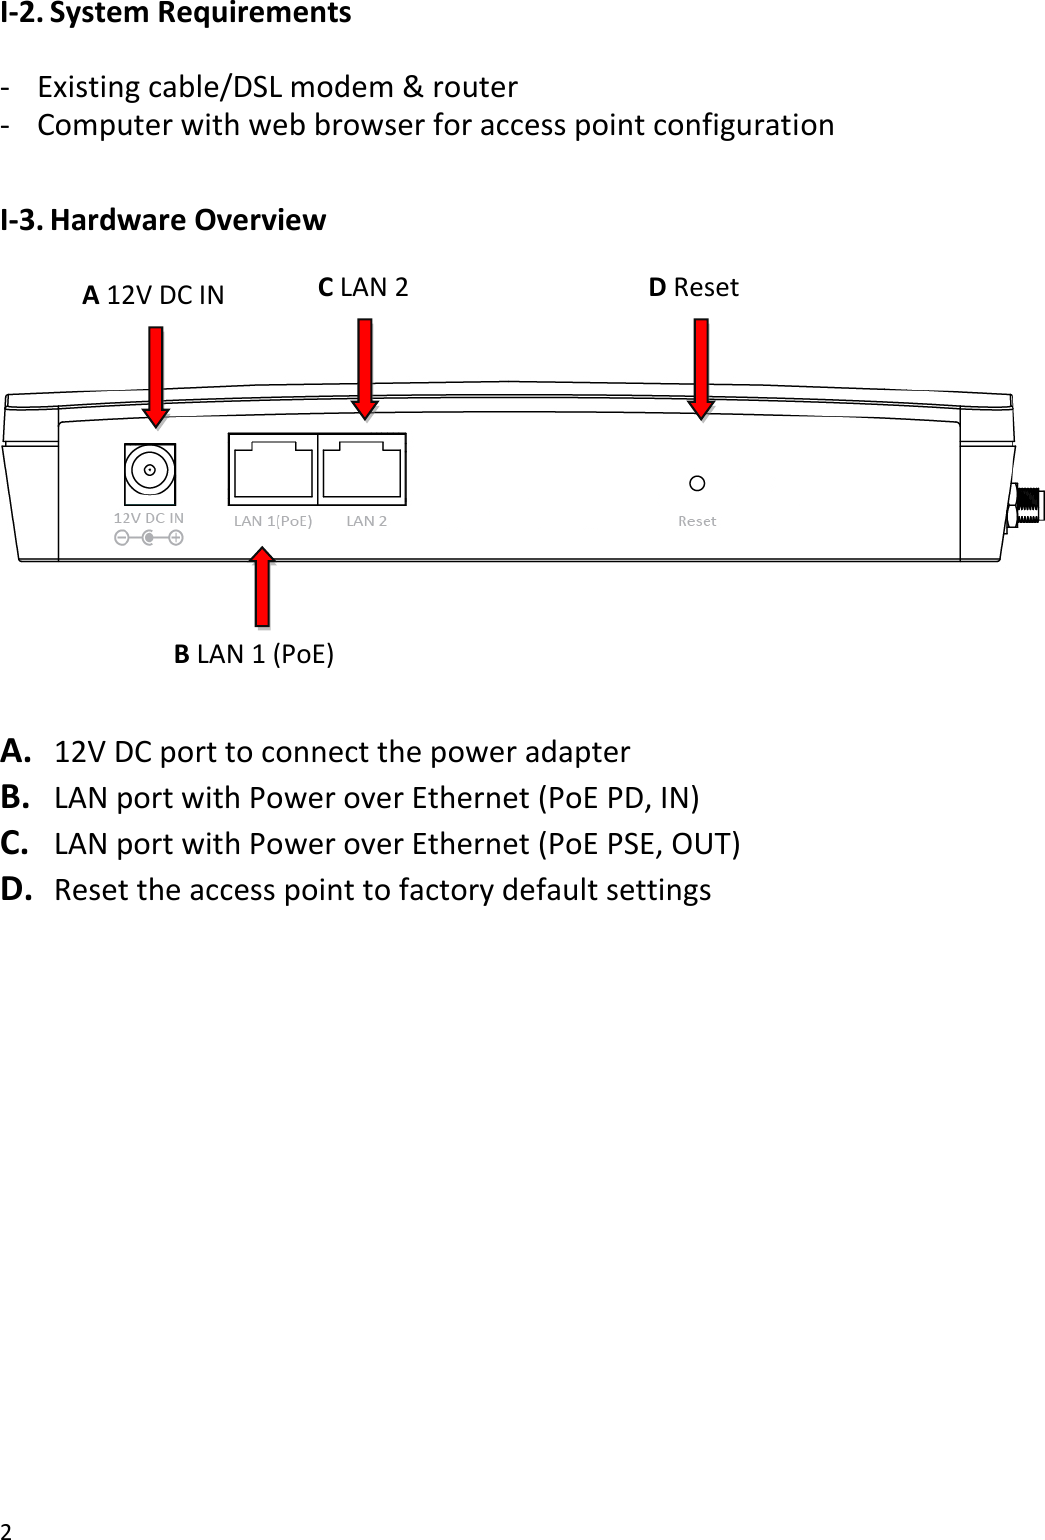 2  I-2. System Requirements  - Existing cable/DSL modem &amp; router - Computer with web browser for access point configuration  I-3. Hardware Overview          A.   12V DC port to connect the power adapter B.   LAN port with Power over Ethernet (PoE PD, IN) C.   LAN port with Power over Ethernet (PoE PSE, OUT) D.   Reset the access point to factory default settings     A 12V DC IN B LAN 1 (PoE) C LAN 2 D Reset 